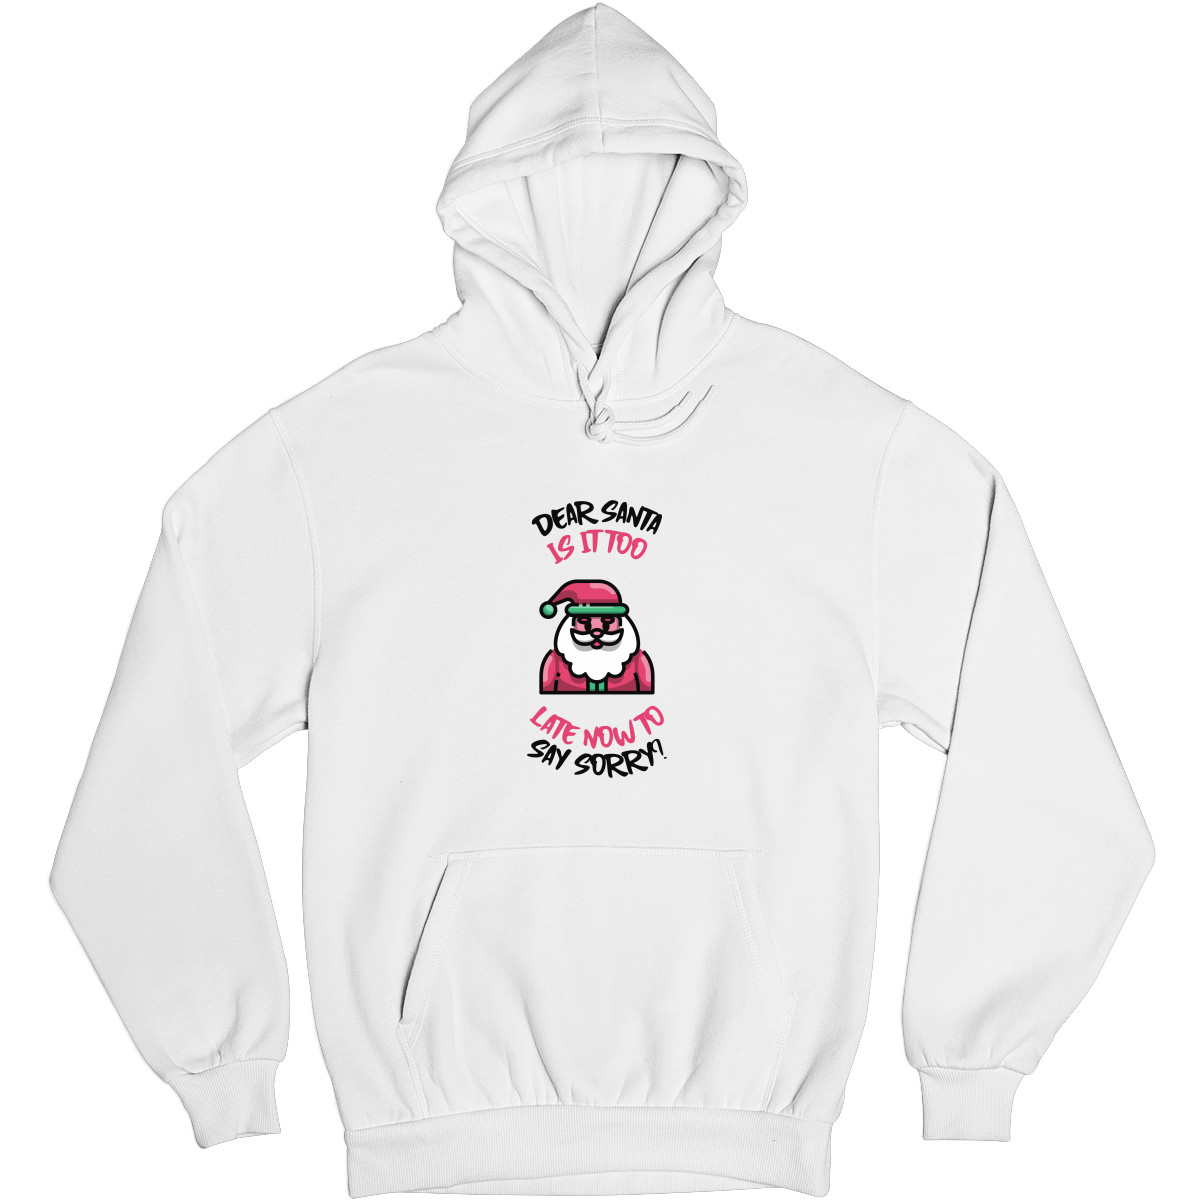 Dear Santa, Is It Too Late to Say Sorry? Unisex Hoodie | White